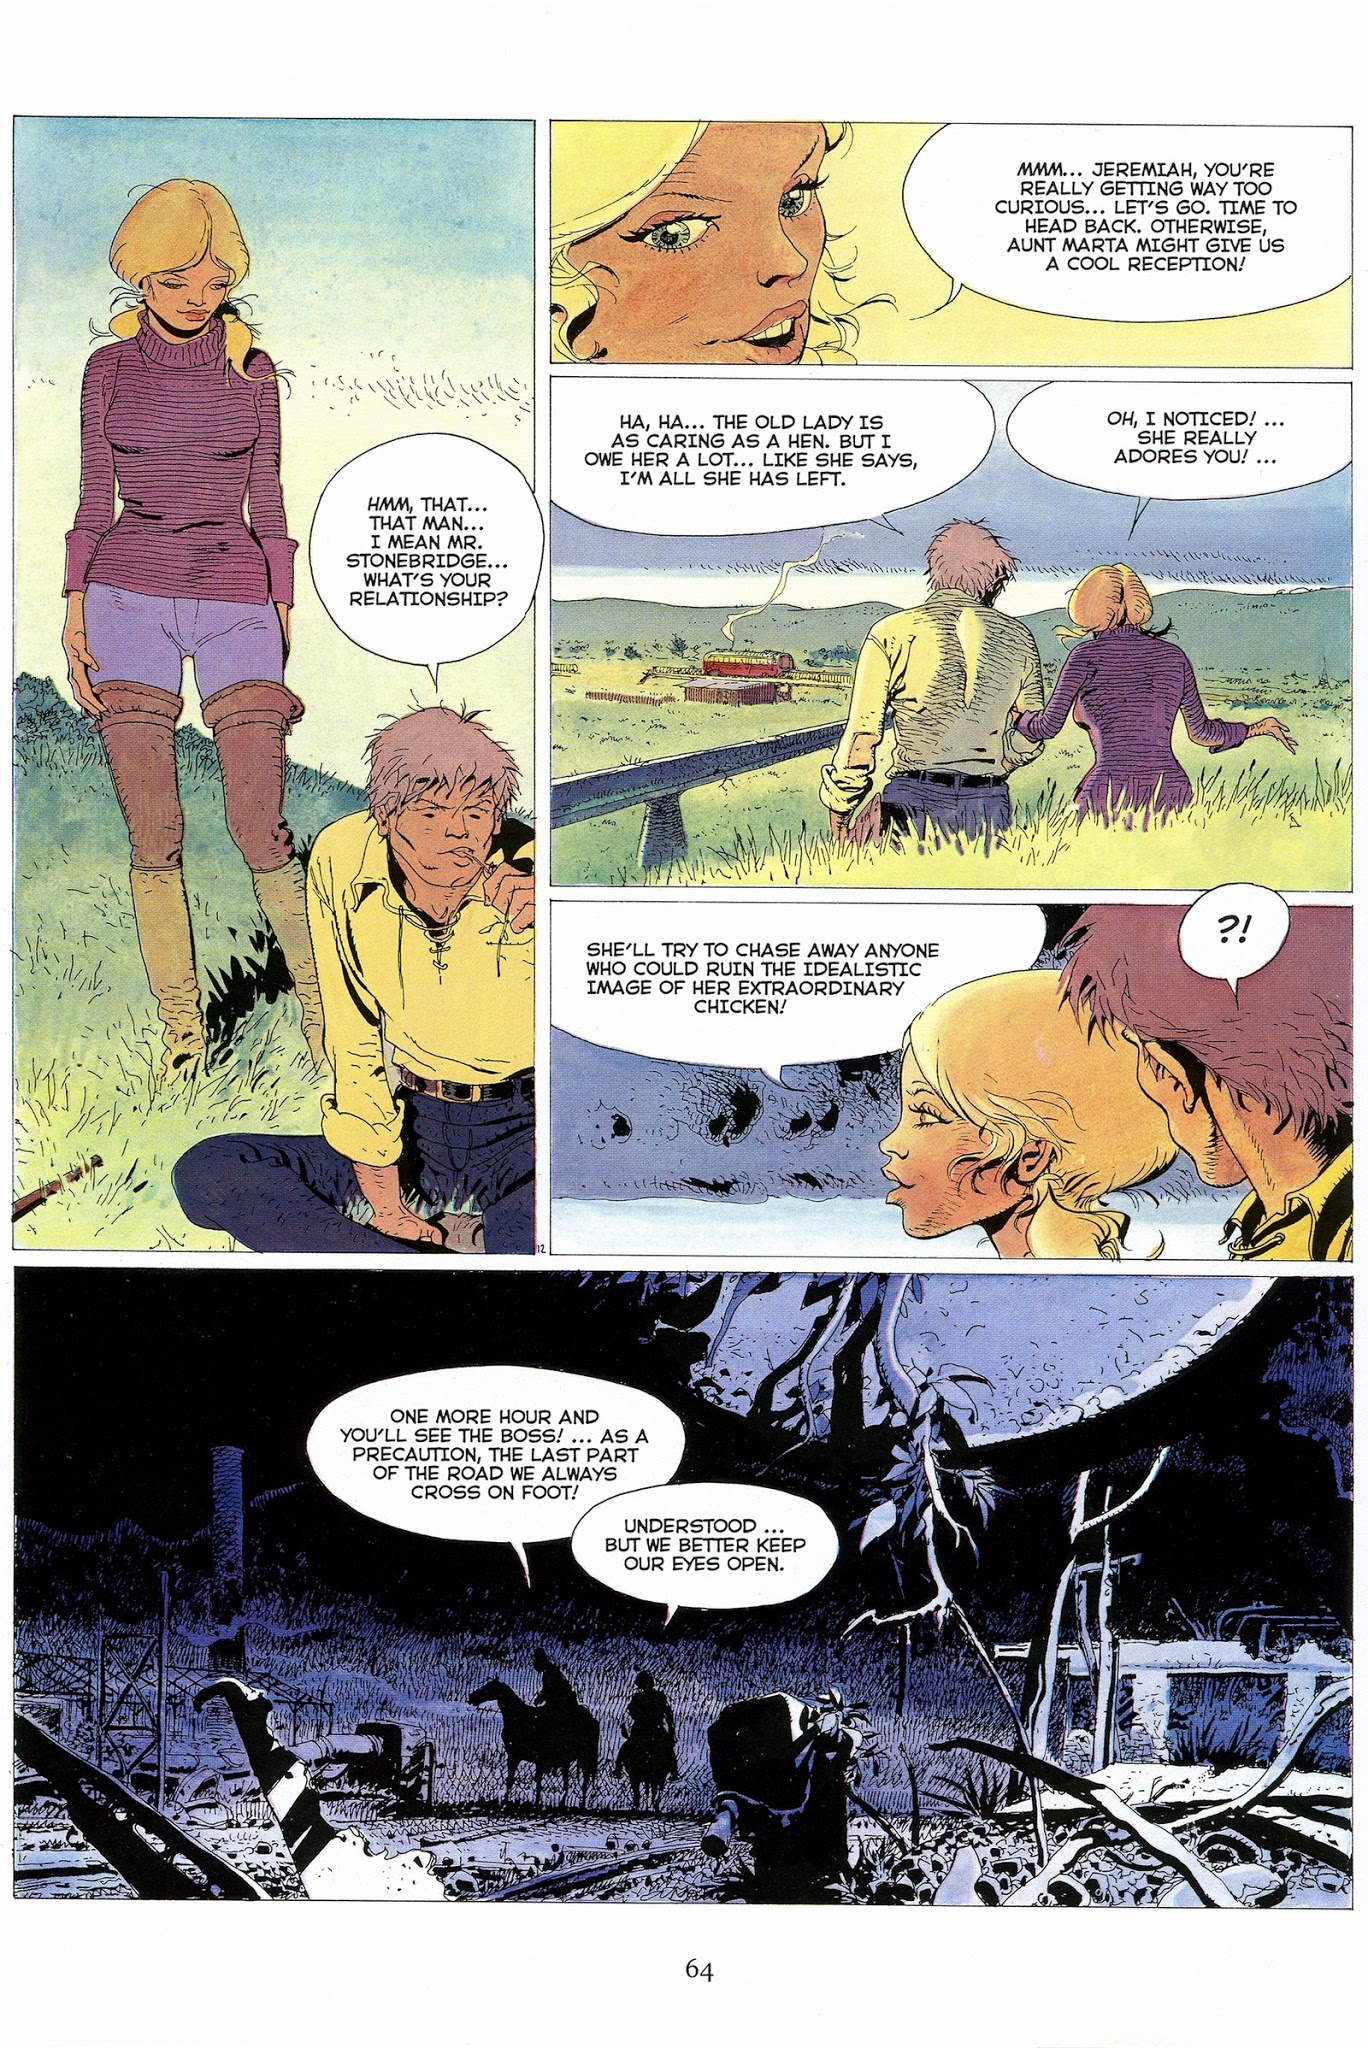 Read online Jeremiah by Hermann comic -  Issue # TPB 2 - 65